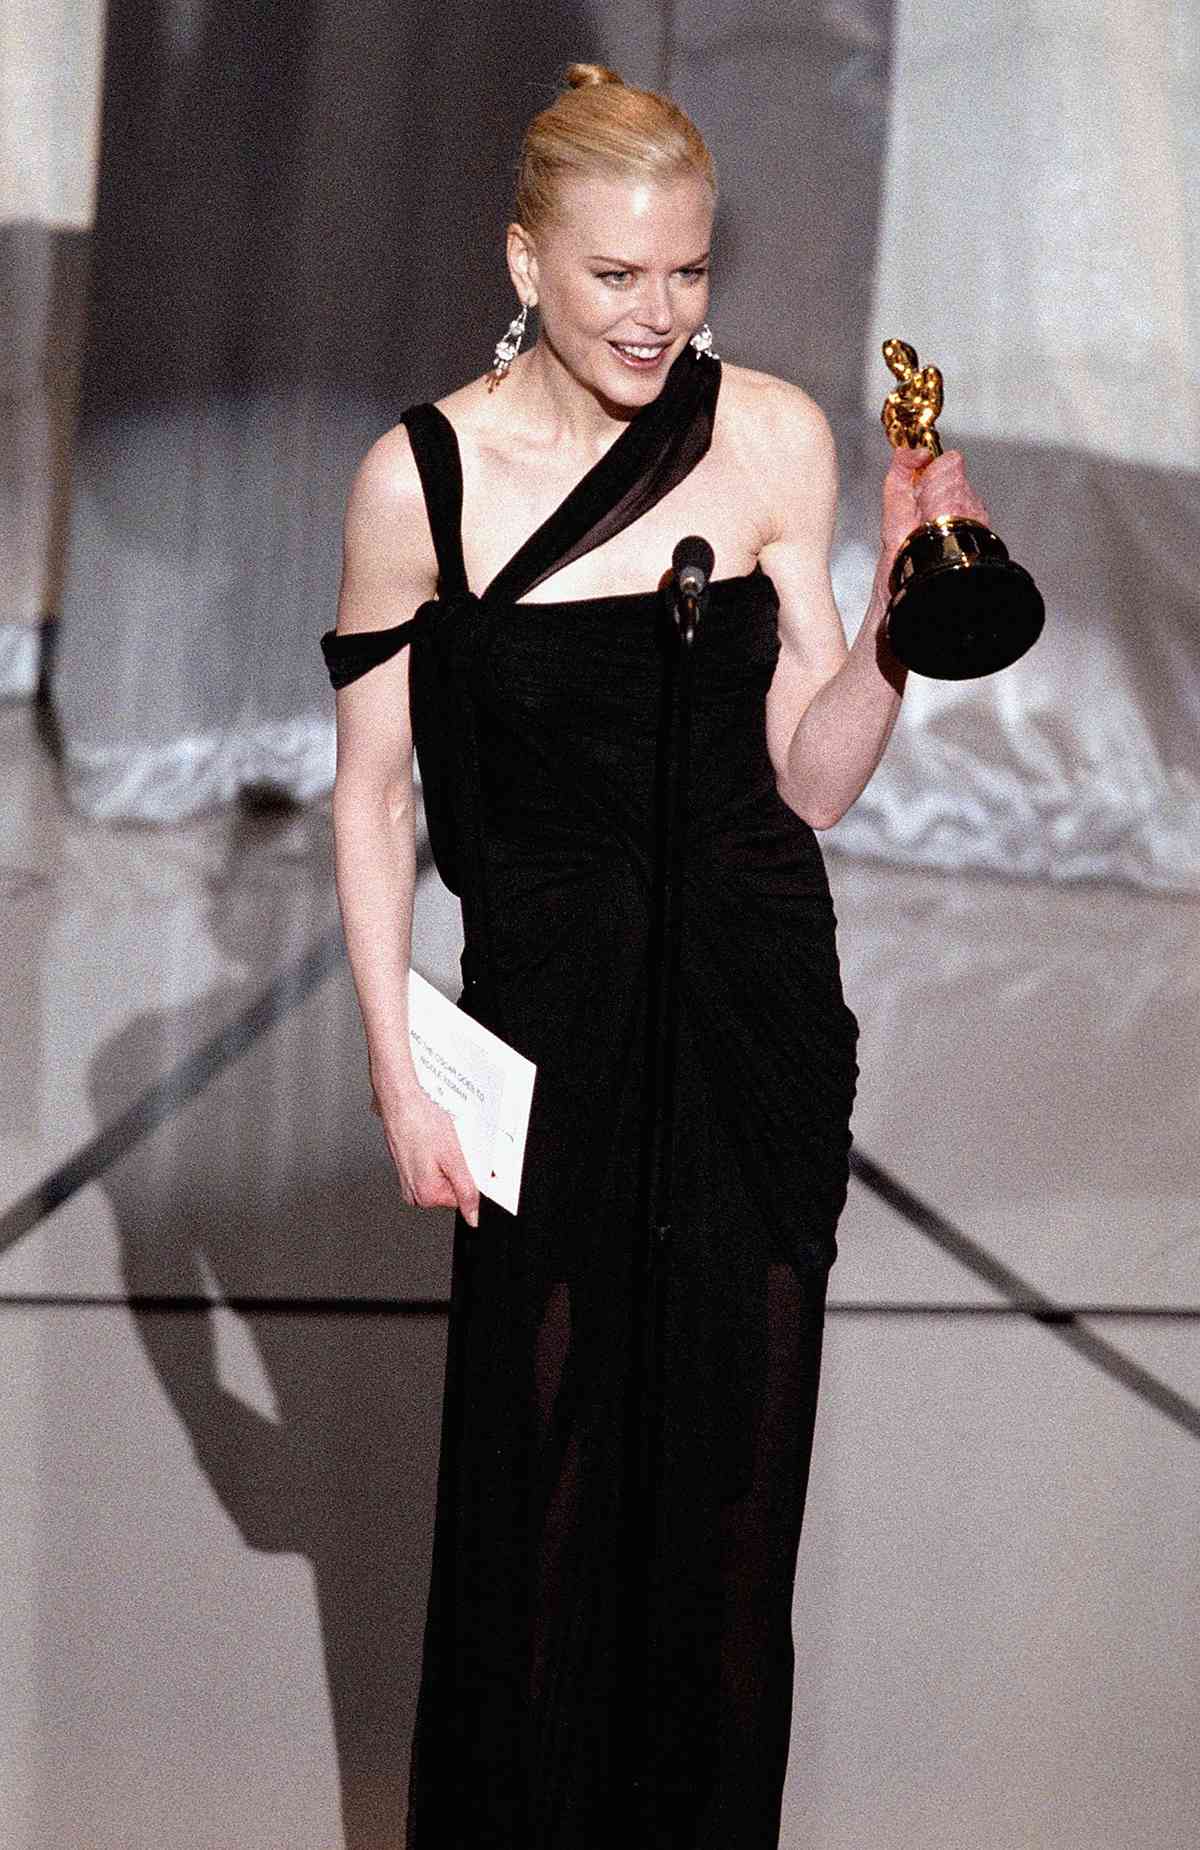 Nicole Kidman accepts her award for Best Actress for her performance in 'The Hours' during the 75th Annual Academy Awards at the Kodak Theater on March 23, 2003 in Hollywood, California. 